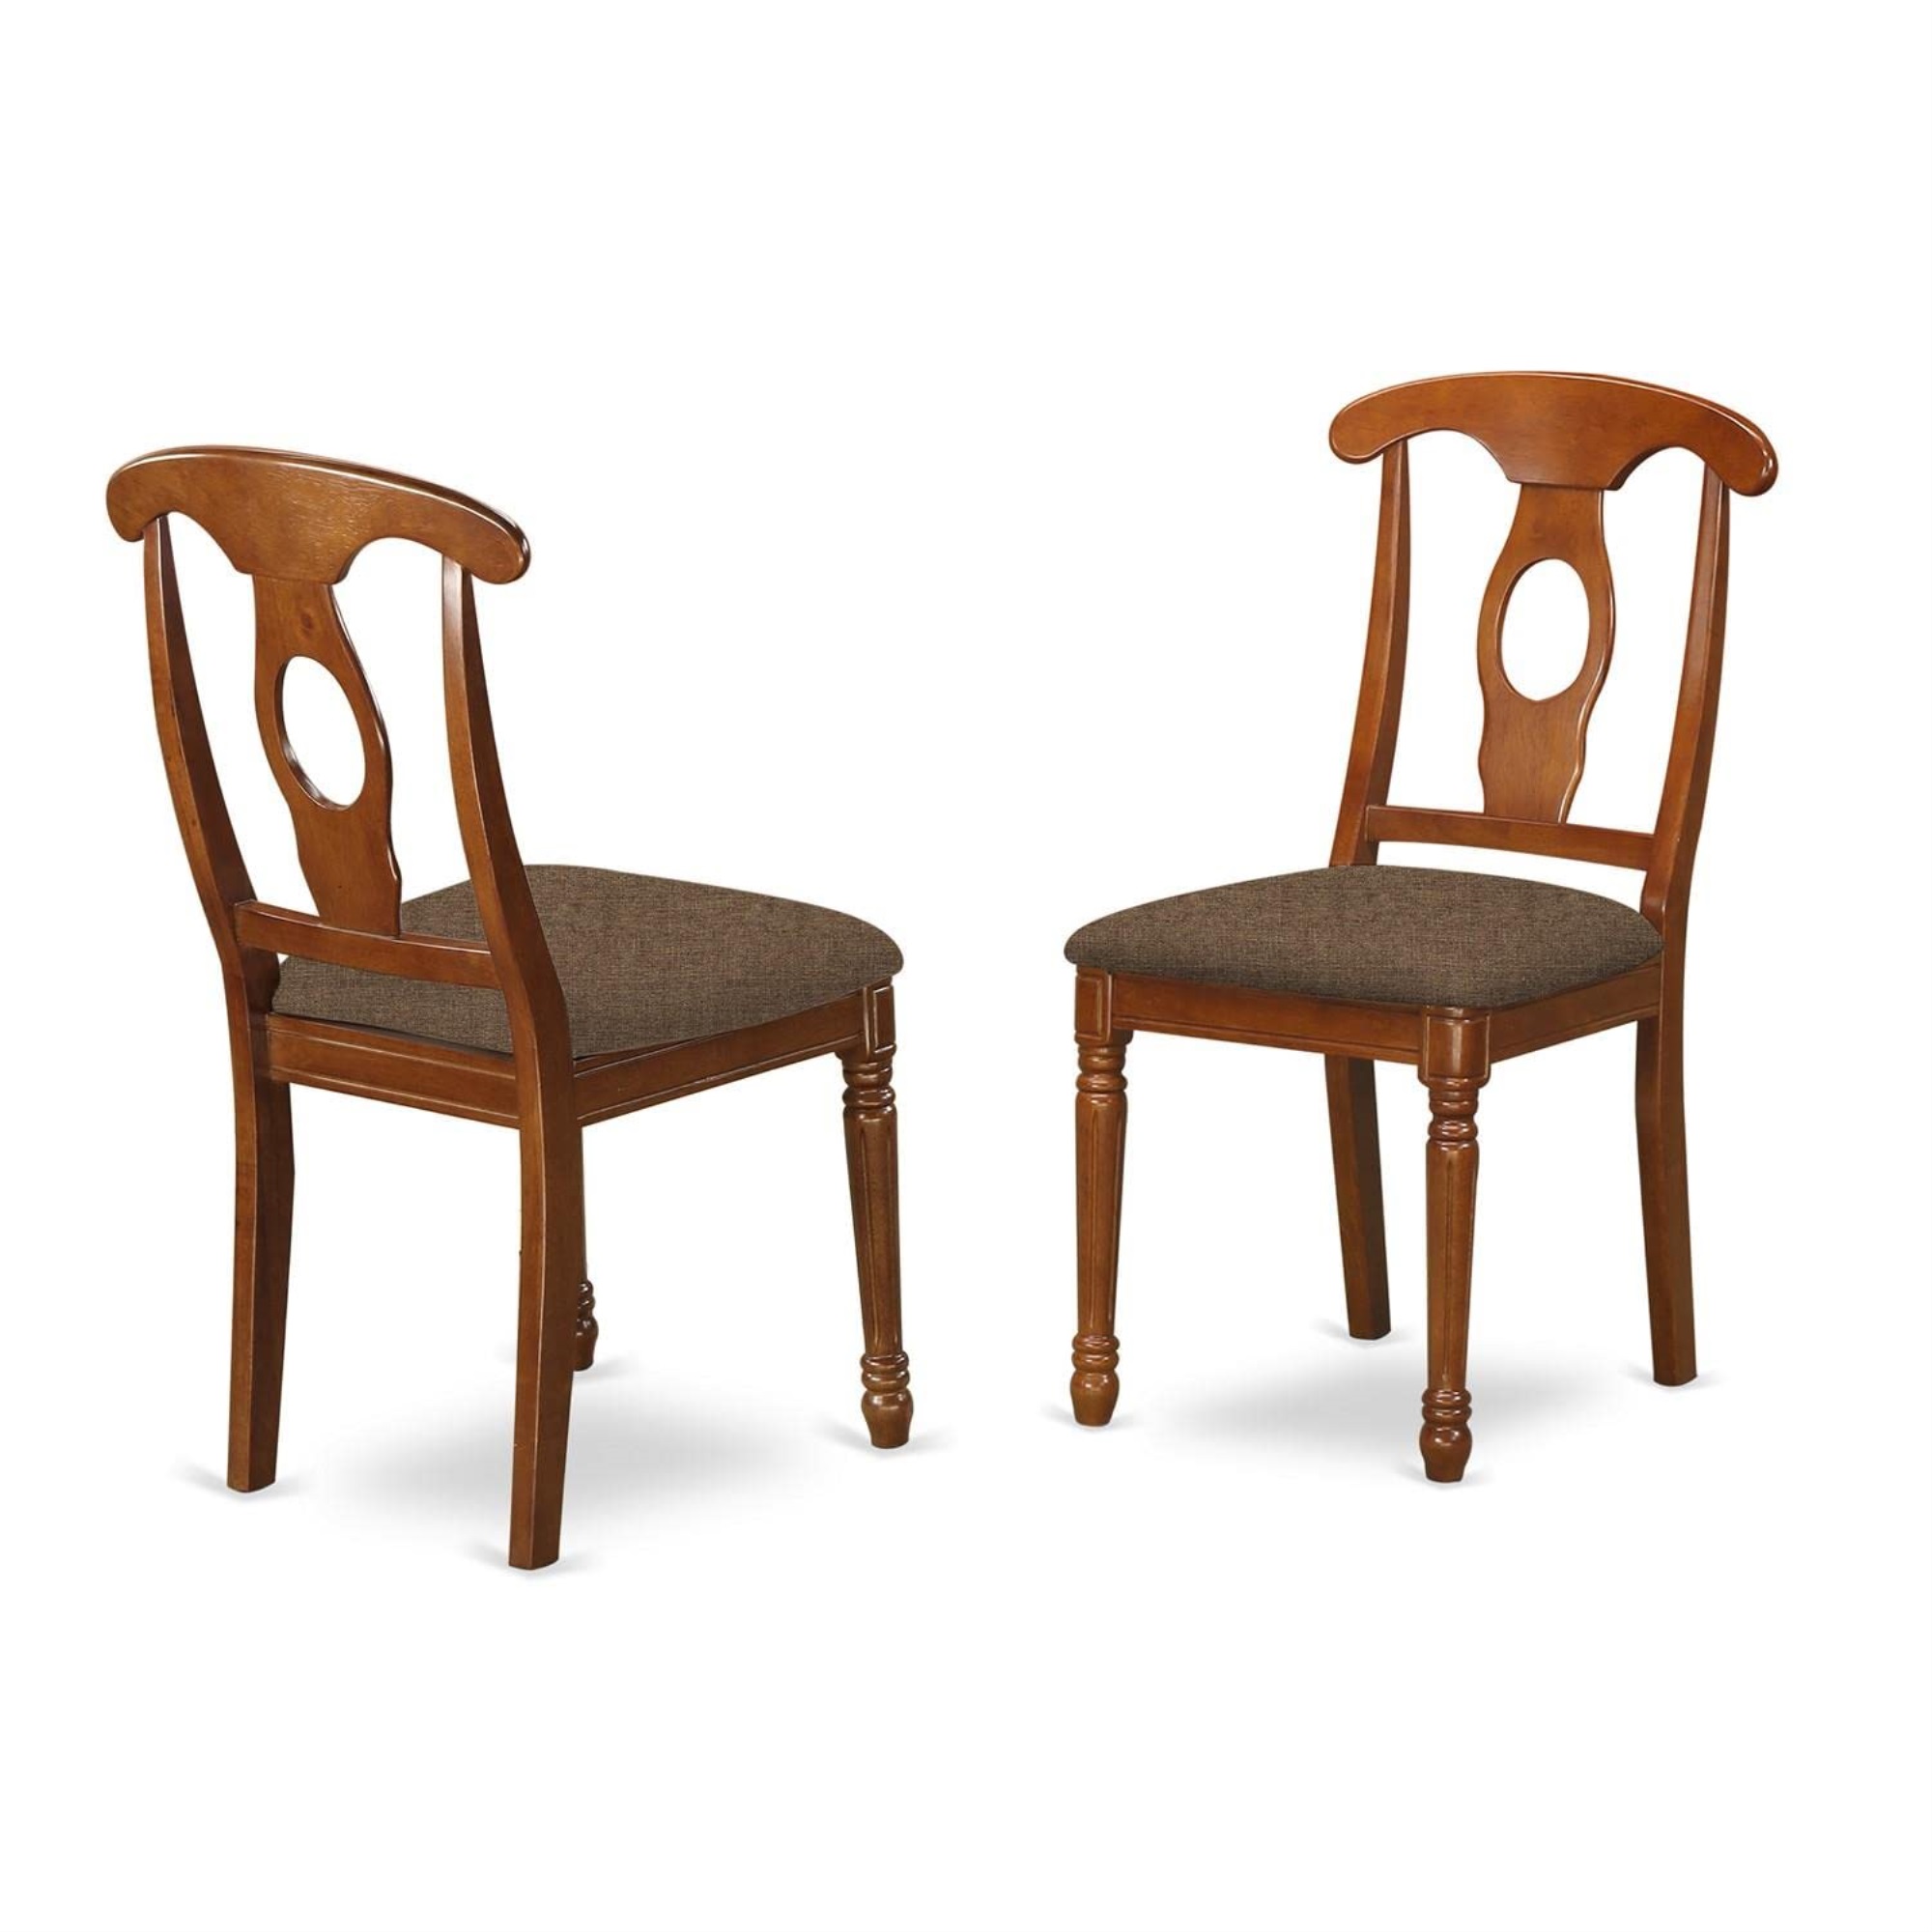 East West Furniture Set of 2 Chairs NAC-SBR-C Napoleon styled kitchen chair with upholstered seat